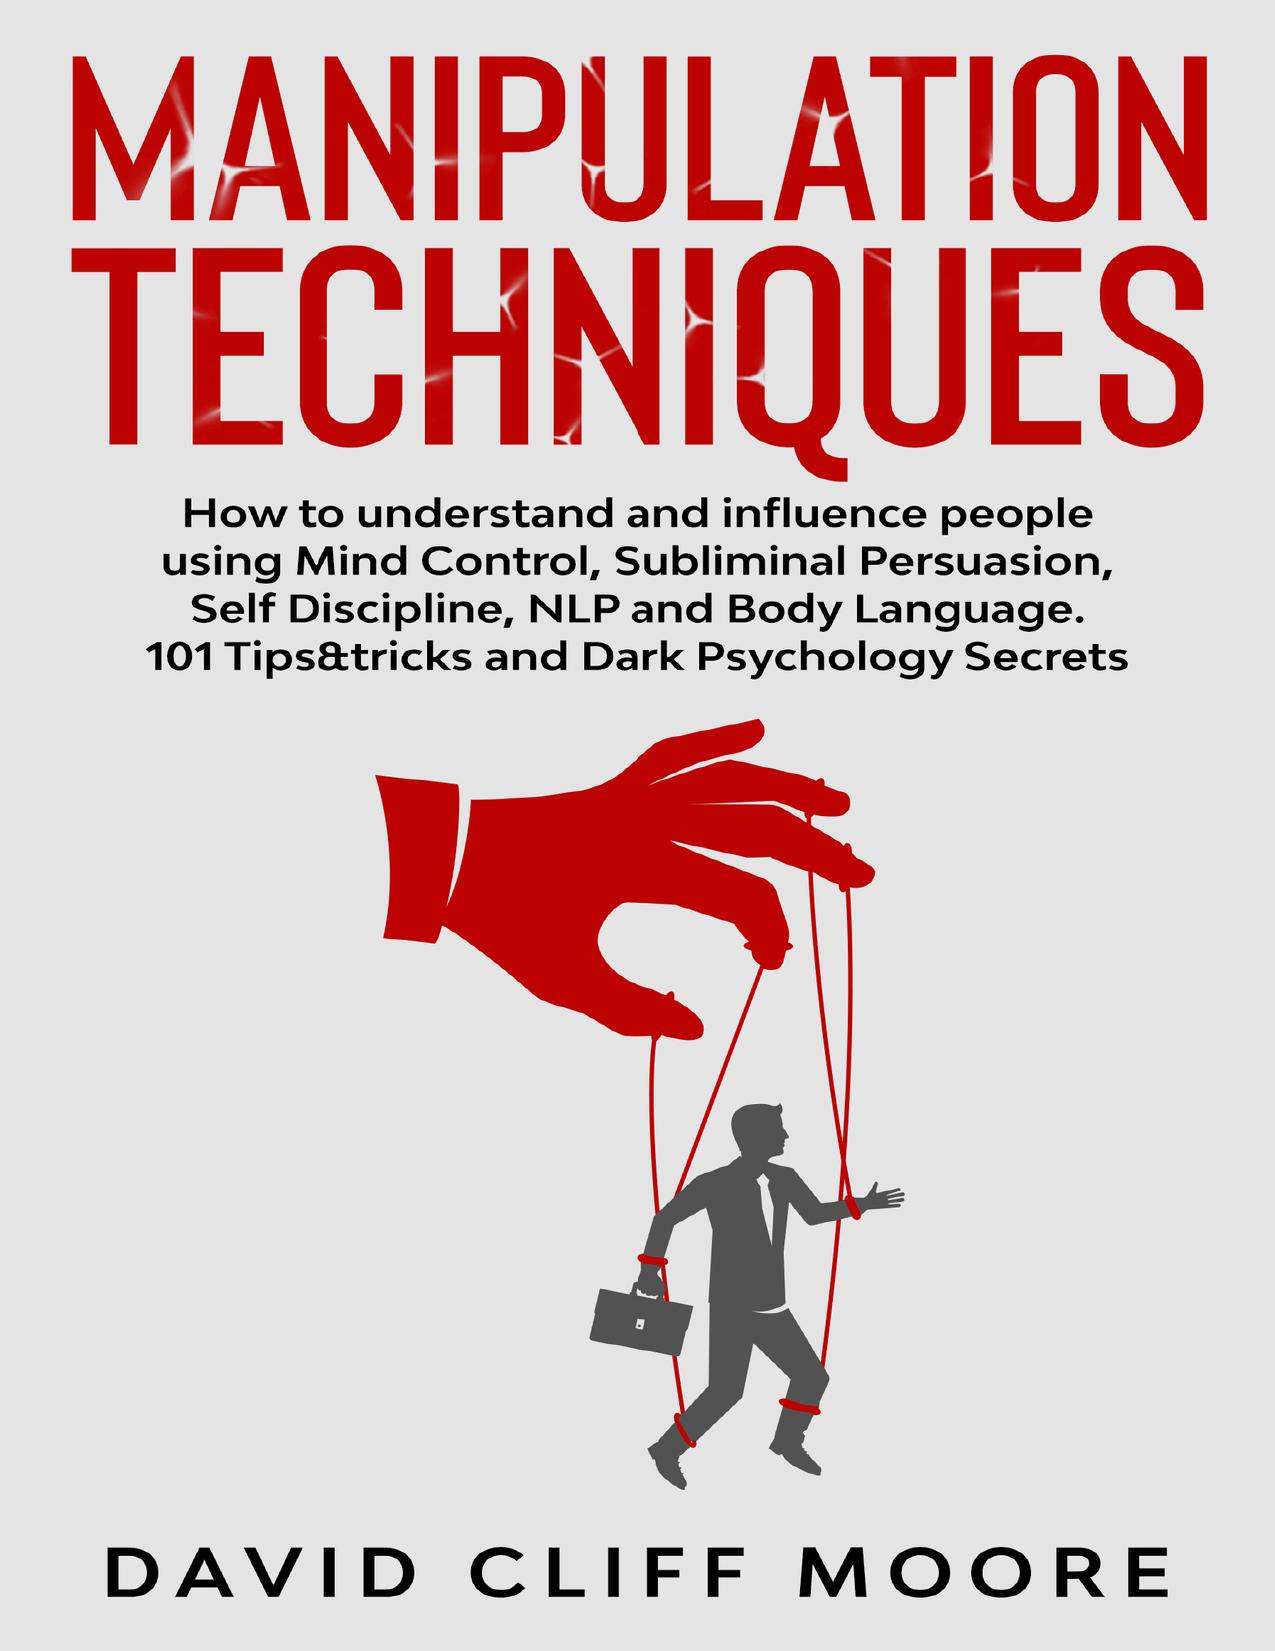 Manipulation Techniques: How to understand and influence people using Mind Control, Subliminal Persuasion, Self Discipline, NLP and Body Language. 101 Tips&tricks and Dark Psychology Secrets by Moore David Cliff